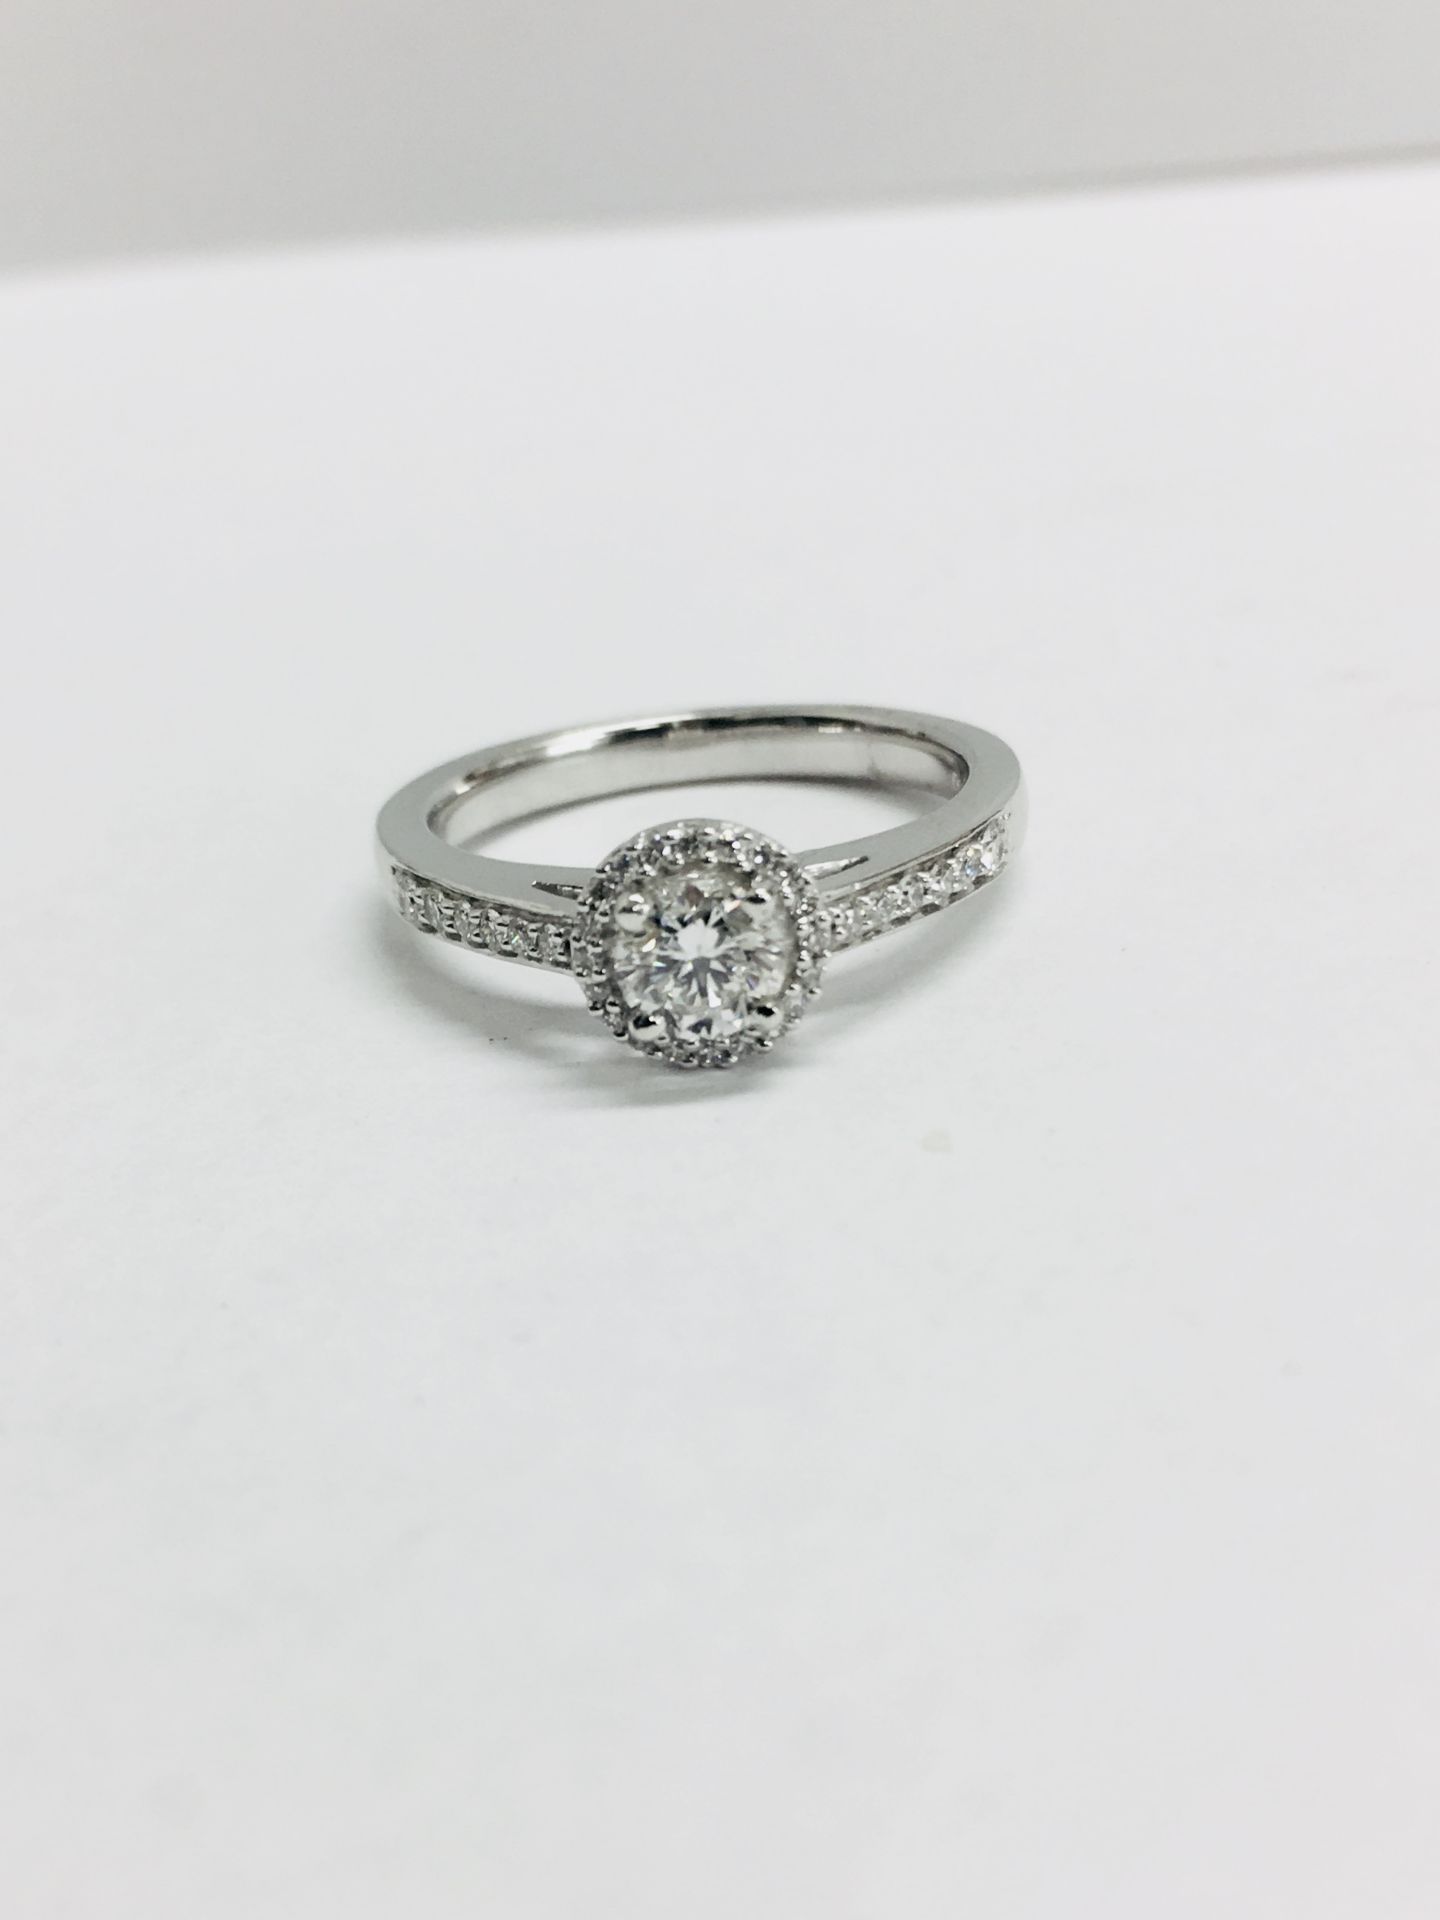 18ct white gold Halo style solitaire ring,0.50ct natural diamond D colour,vs clarity,0.28ct h Colour